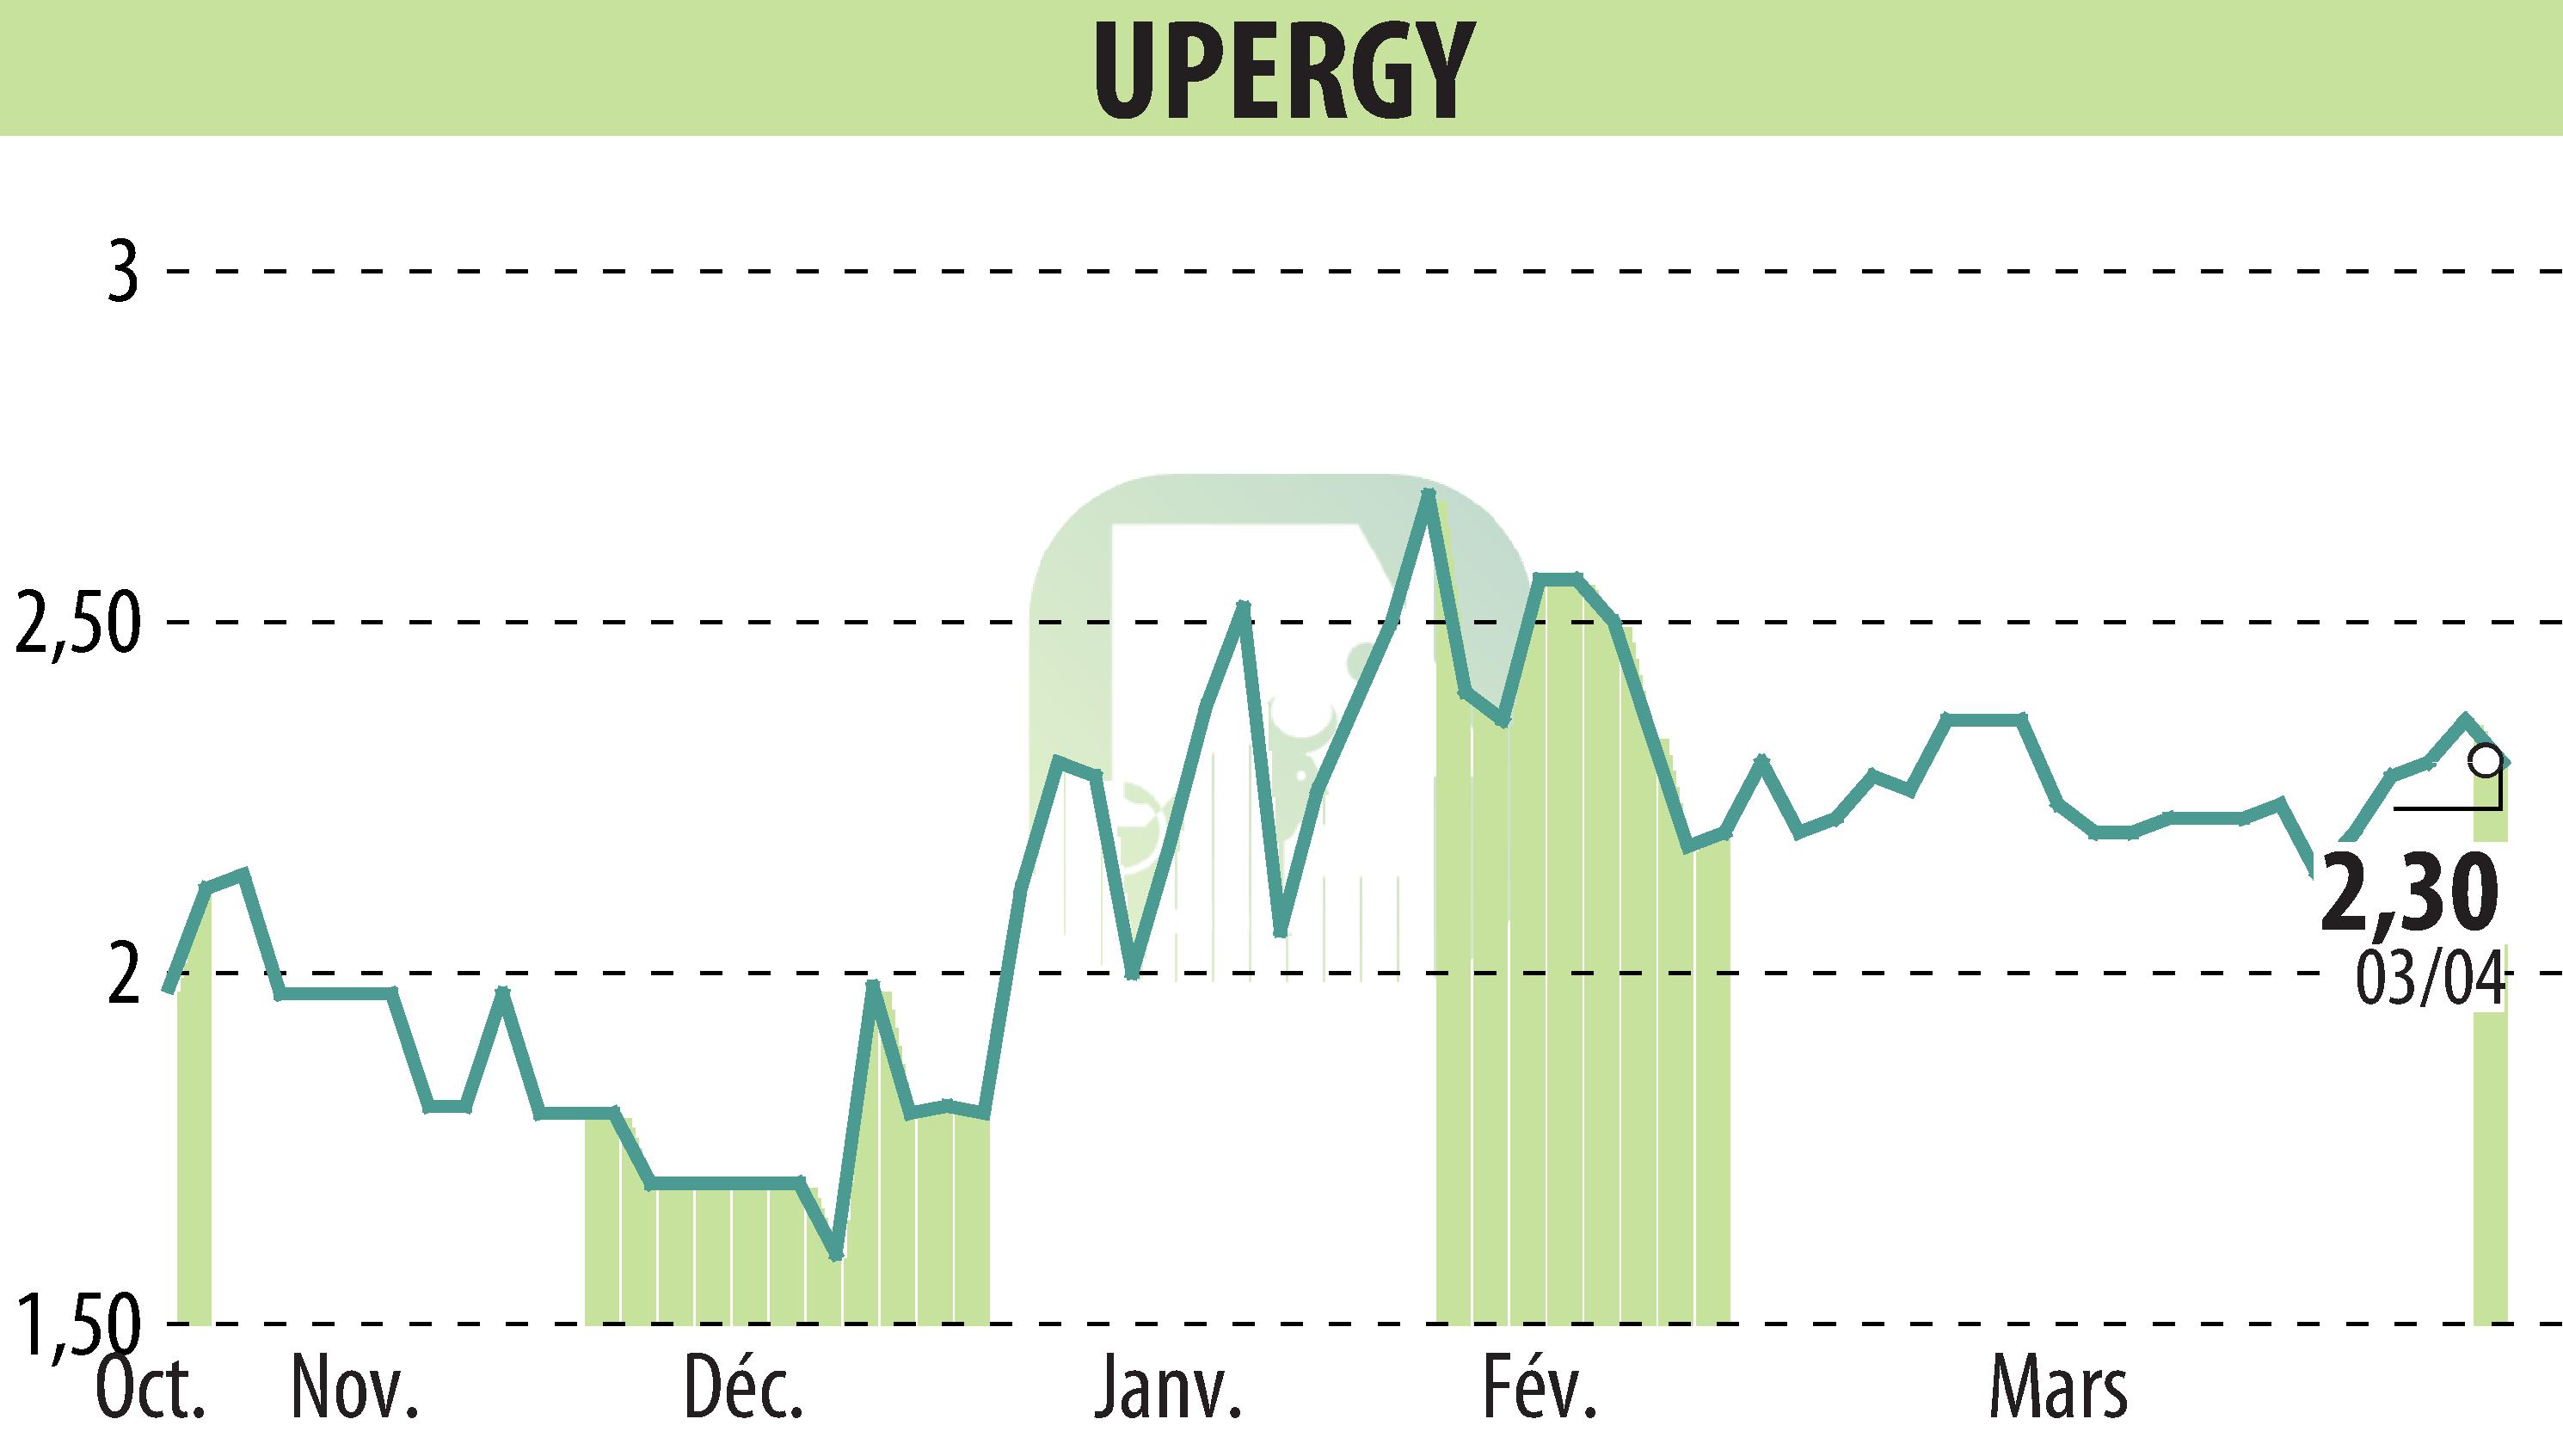 Stock price chart of UPERGY (EPA:ALUPG) showing fluctuations.